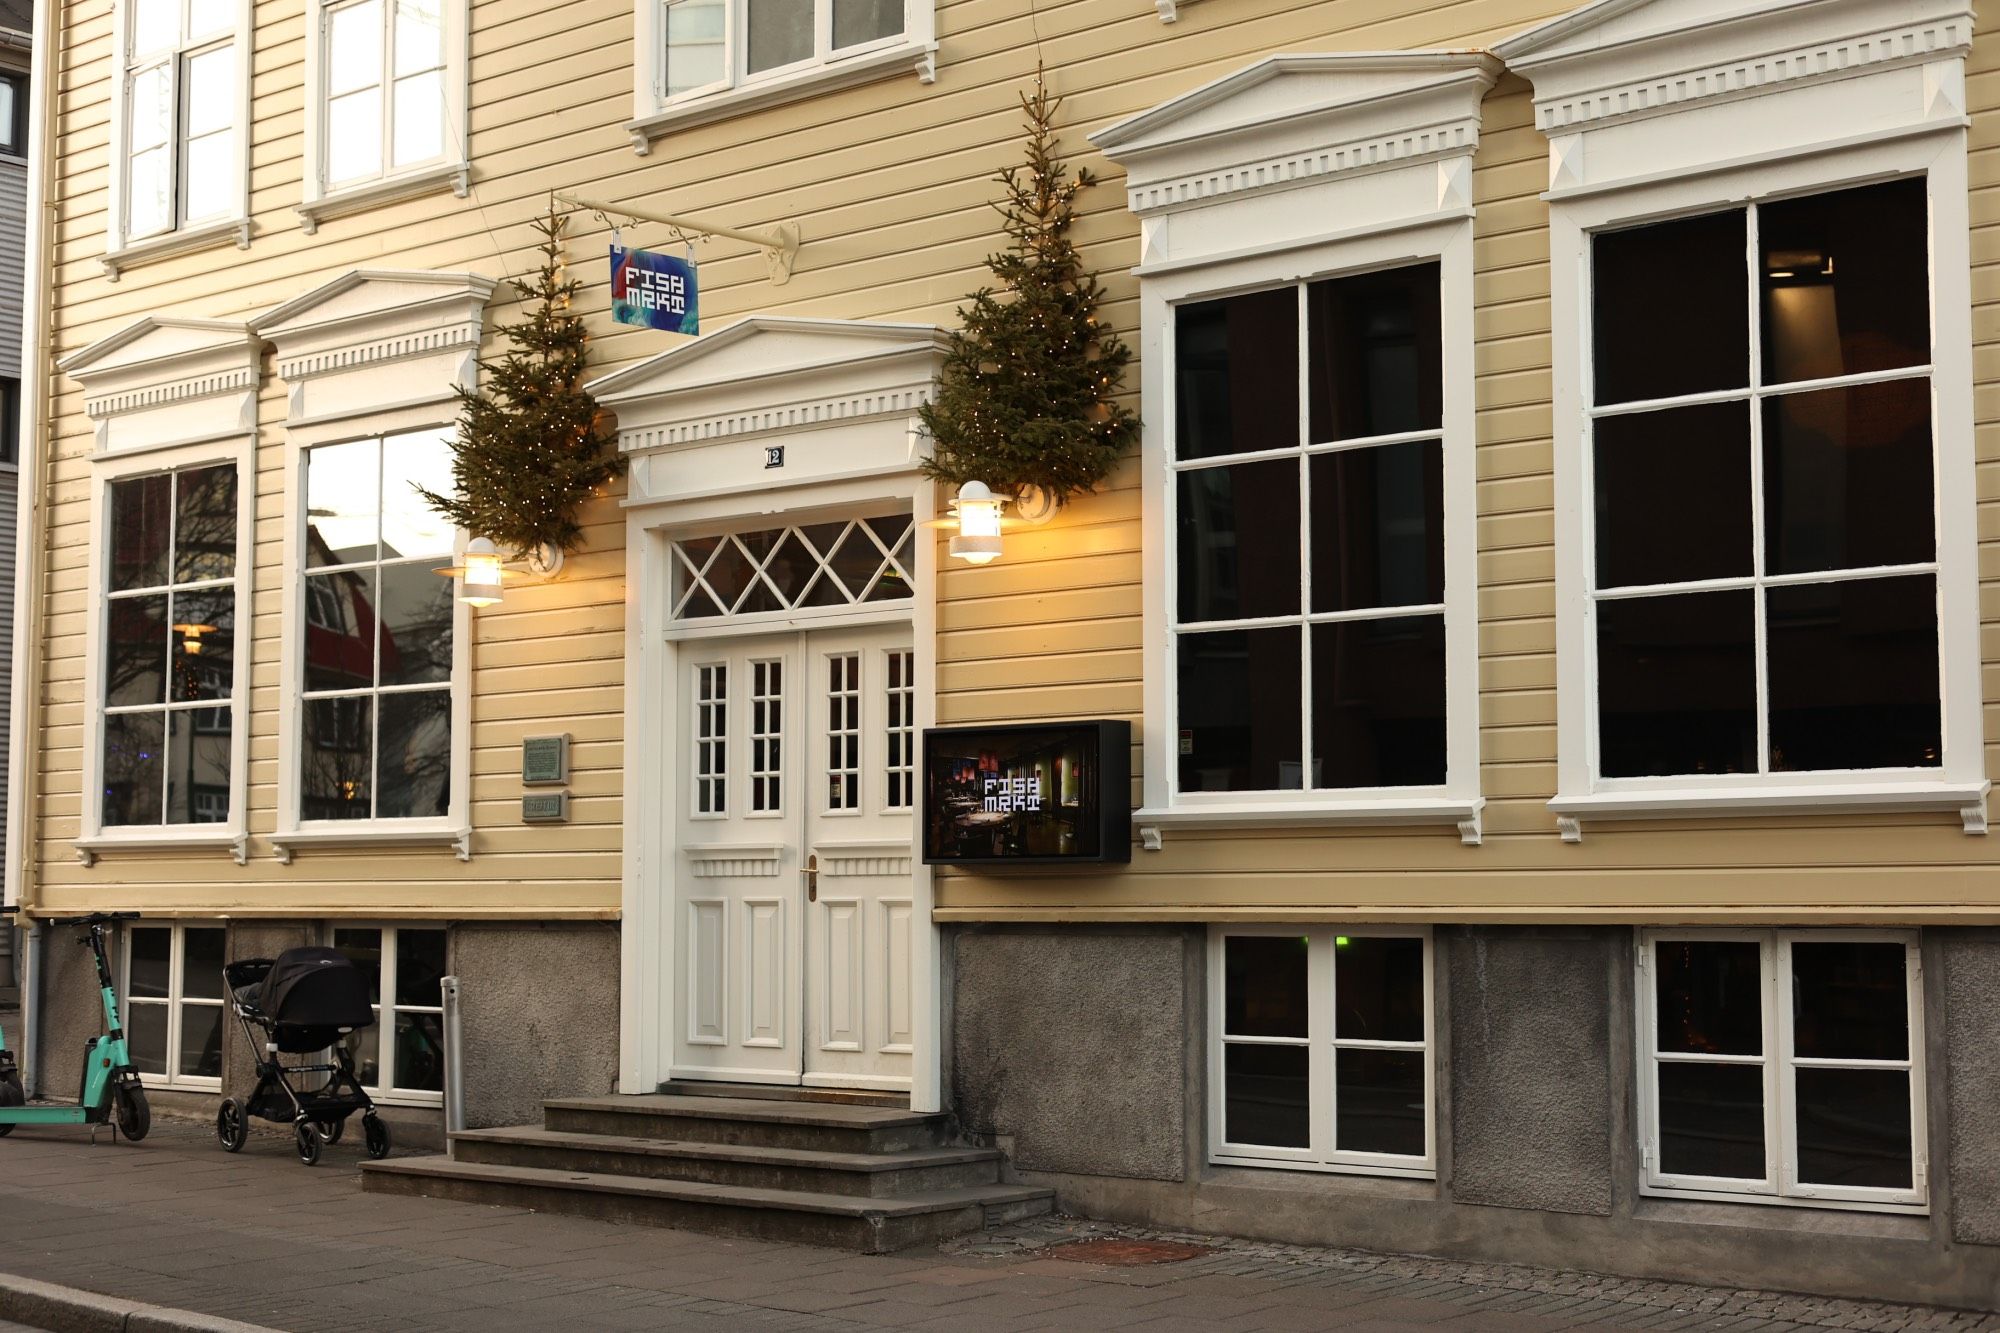 Building with light yellow siding and white accents, the outside of a restaurant called Fishmrkt in Reykjavik